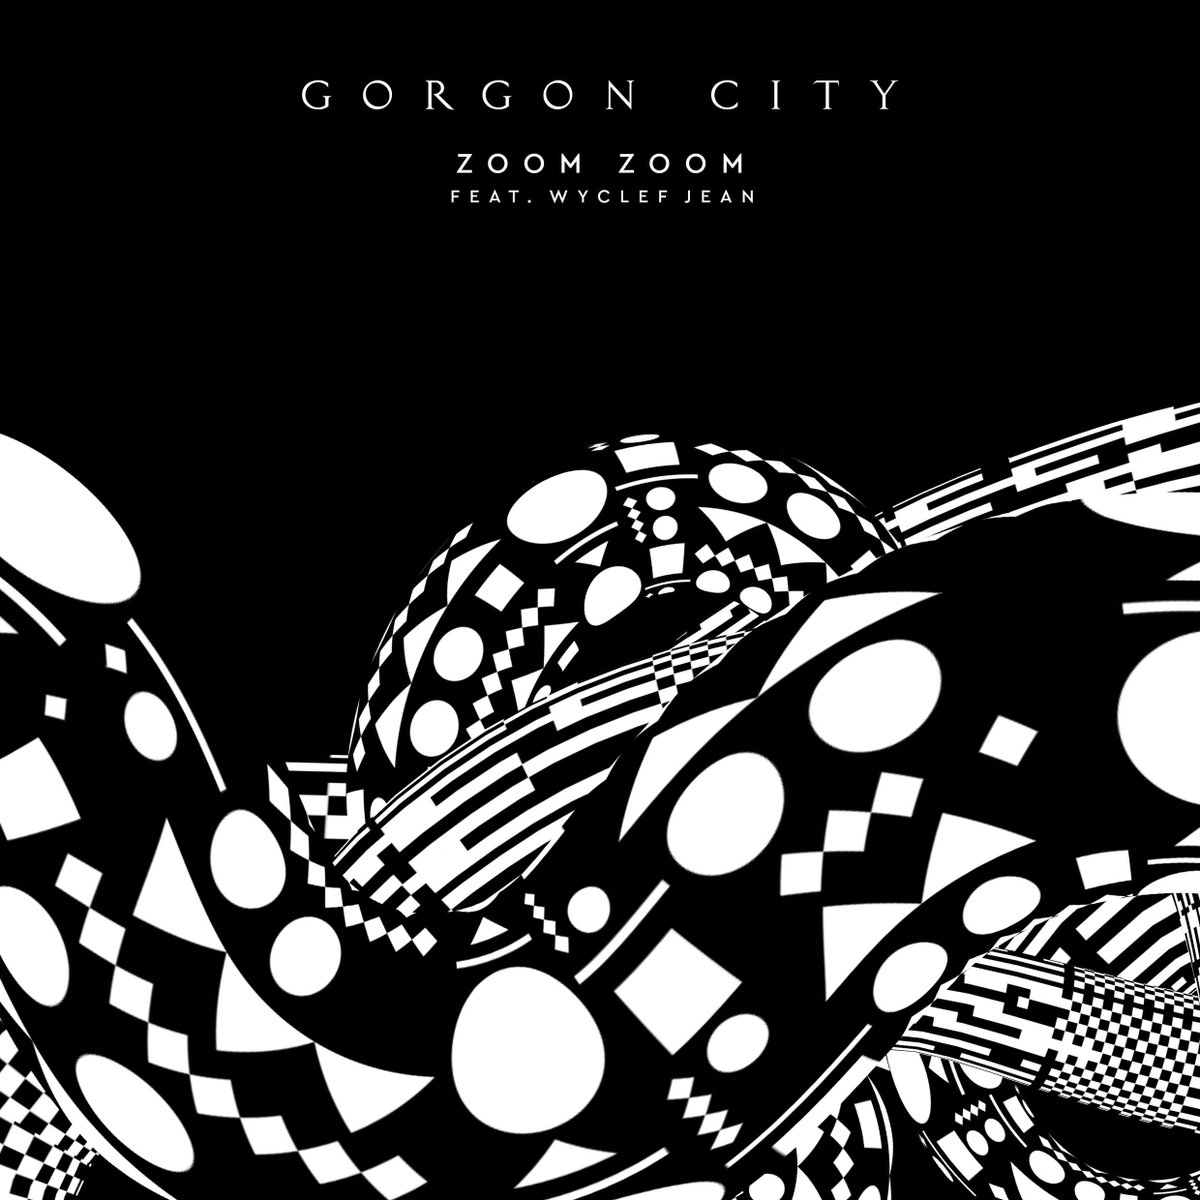 RT @sonyatvpubuk: #NewMusicFriday going off right now with @GorgonCity @wyclef #ZOOMZOOM #FRIYAY indeed https://t.co/LilYIPFq7u https://t.c…